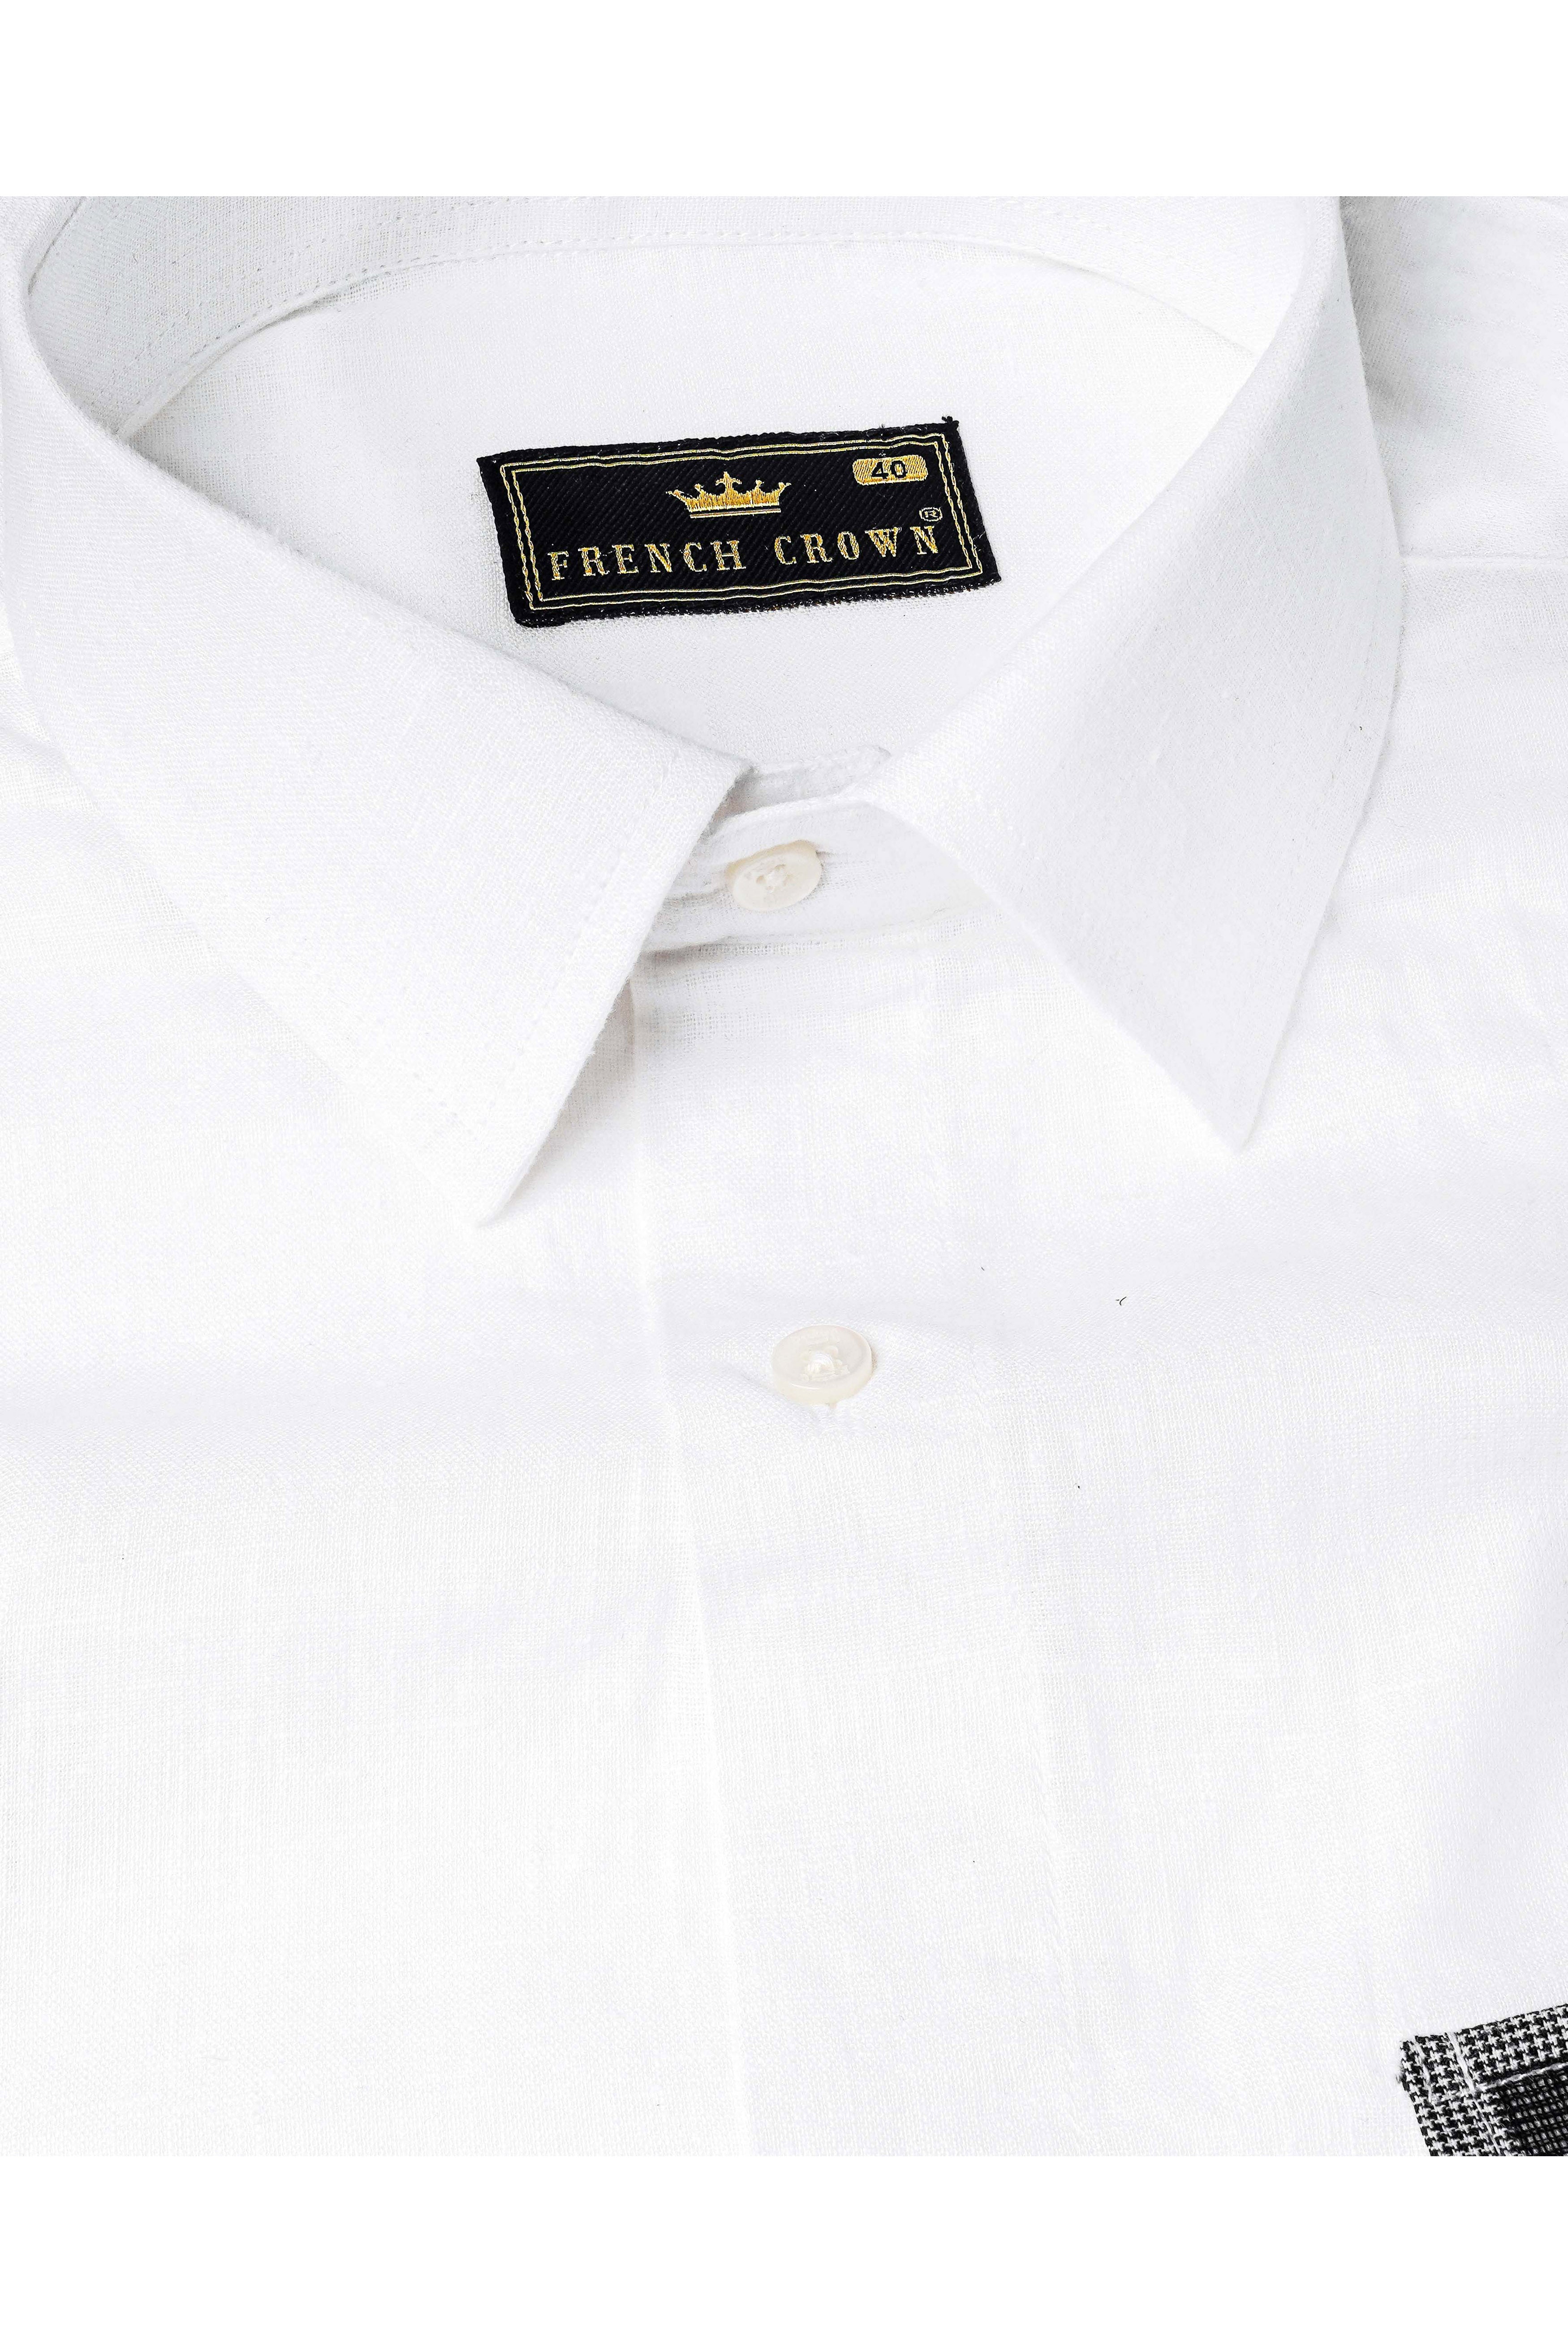 Bright White with Black Brand Embroidered Luxurious Linen Designer Shirt